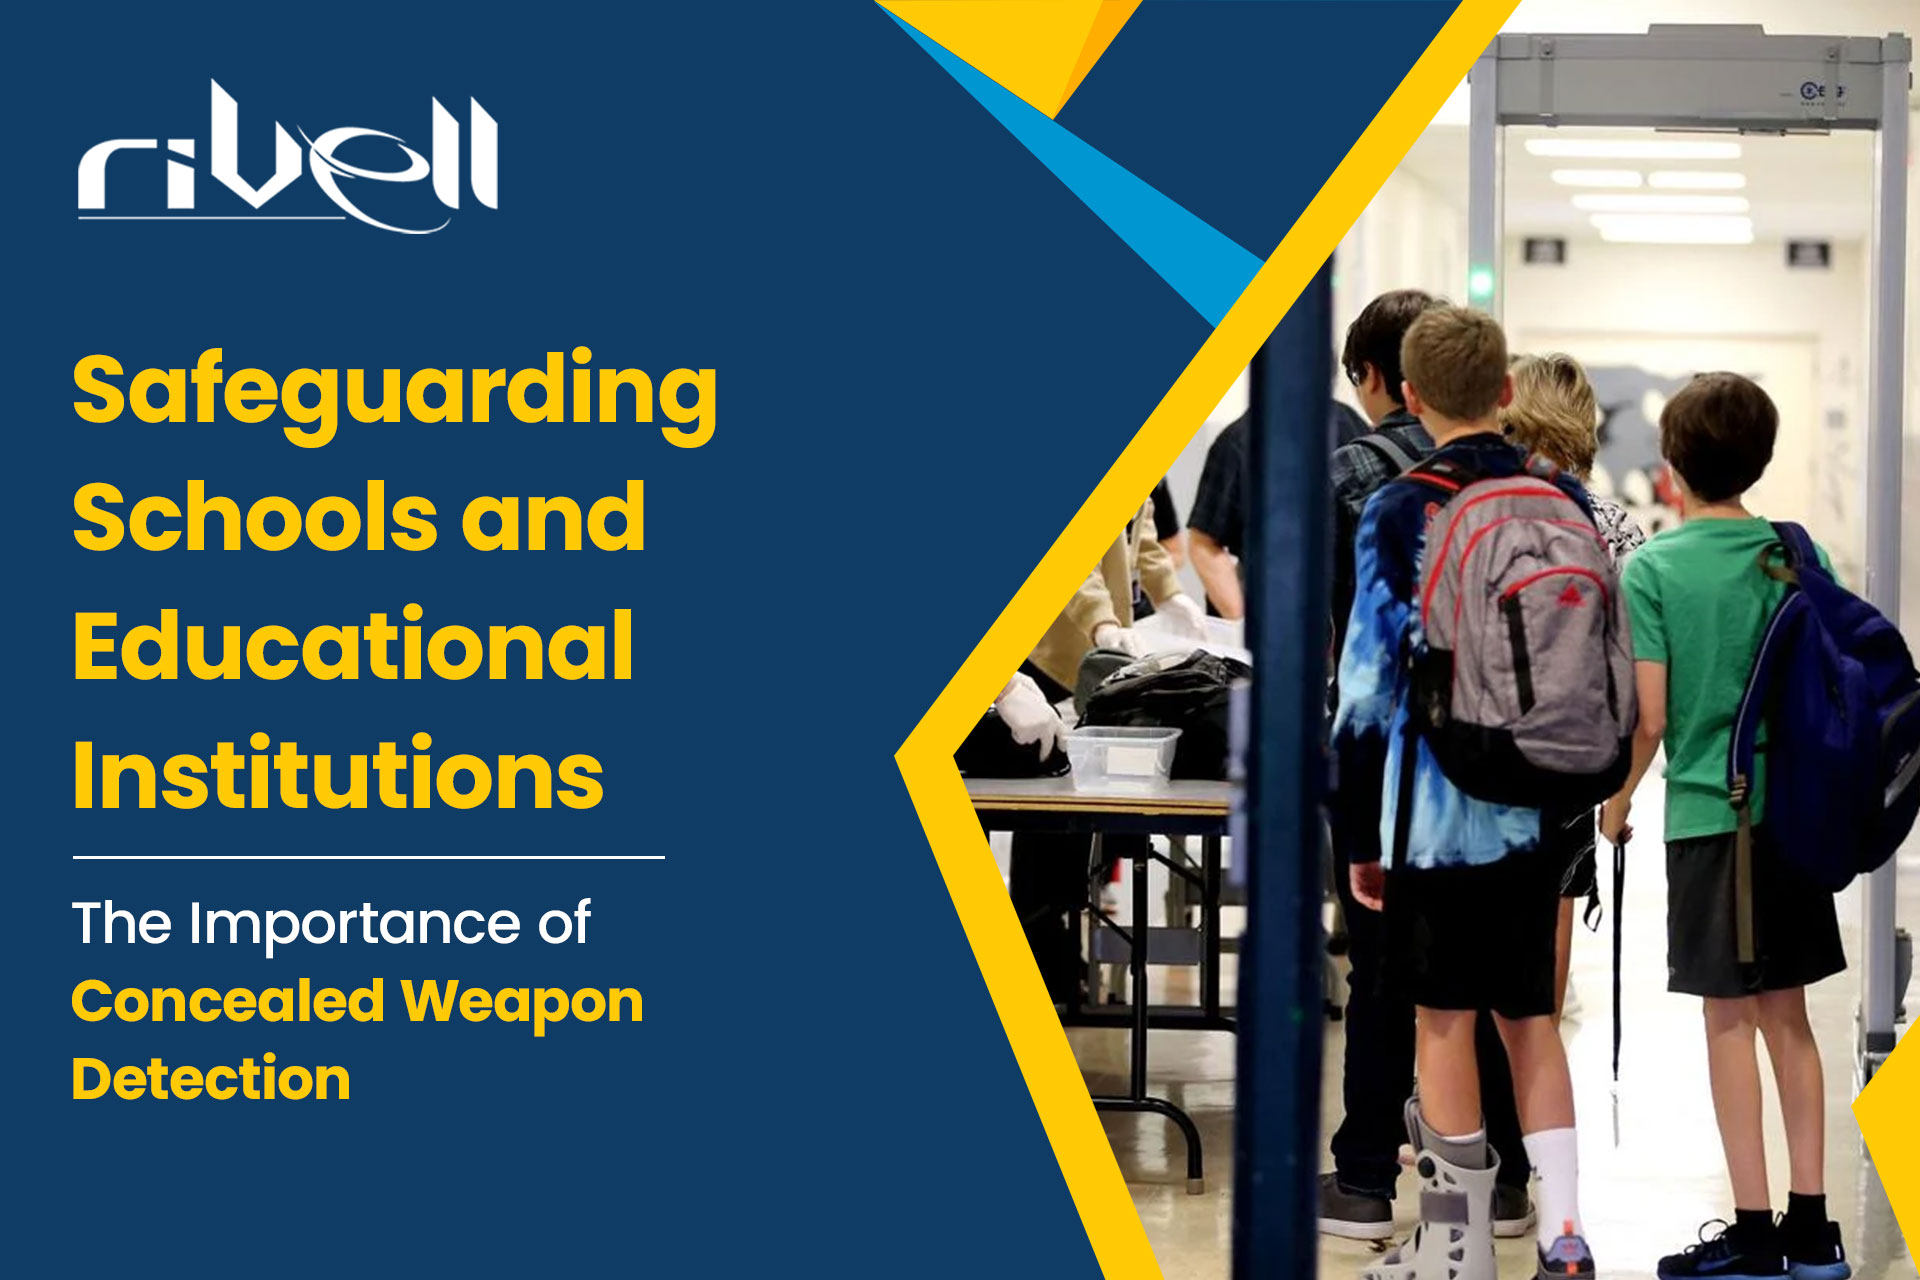 Safeguarding Schools and Educational Institutions The Importance of Concealed Weapon Detection